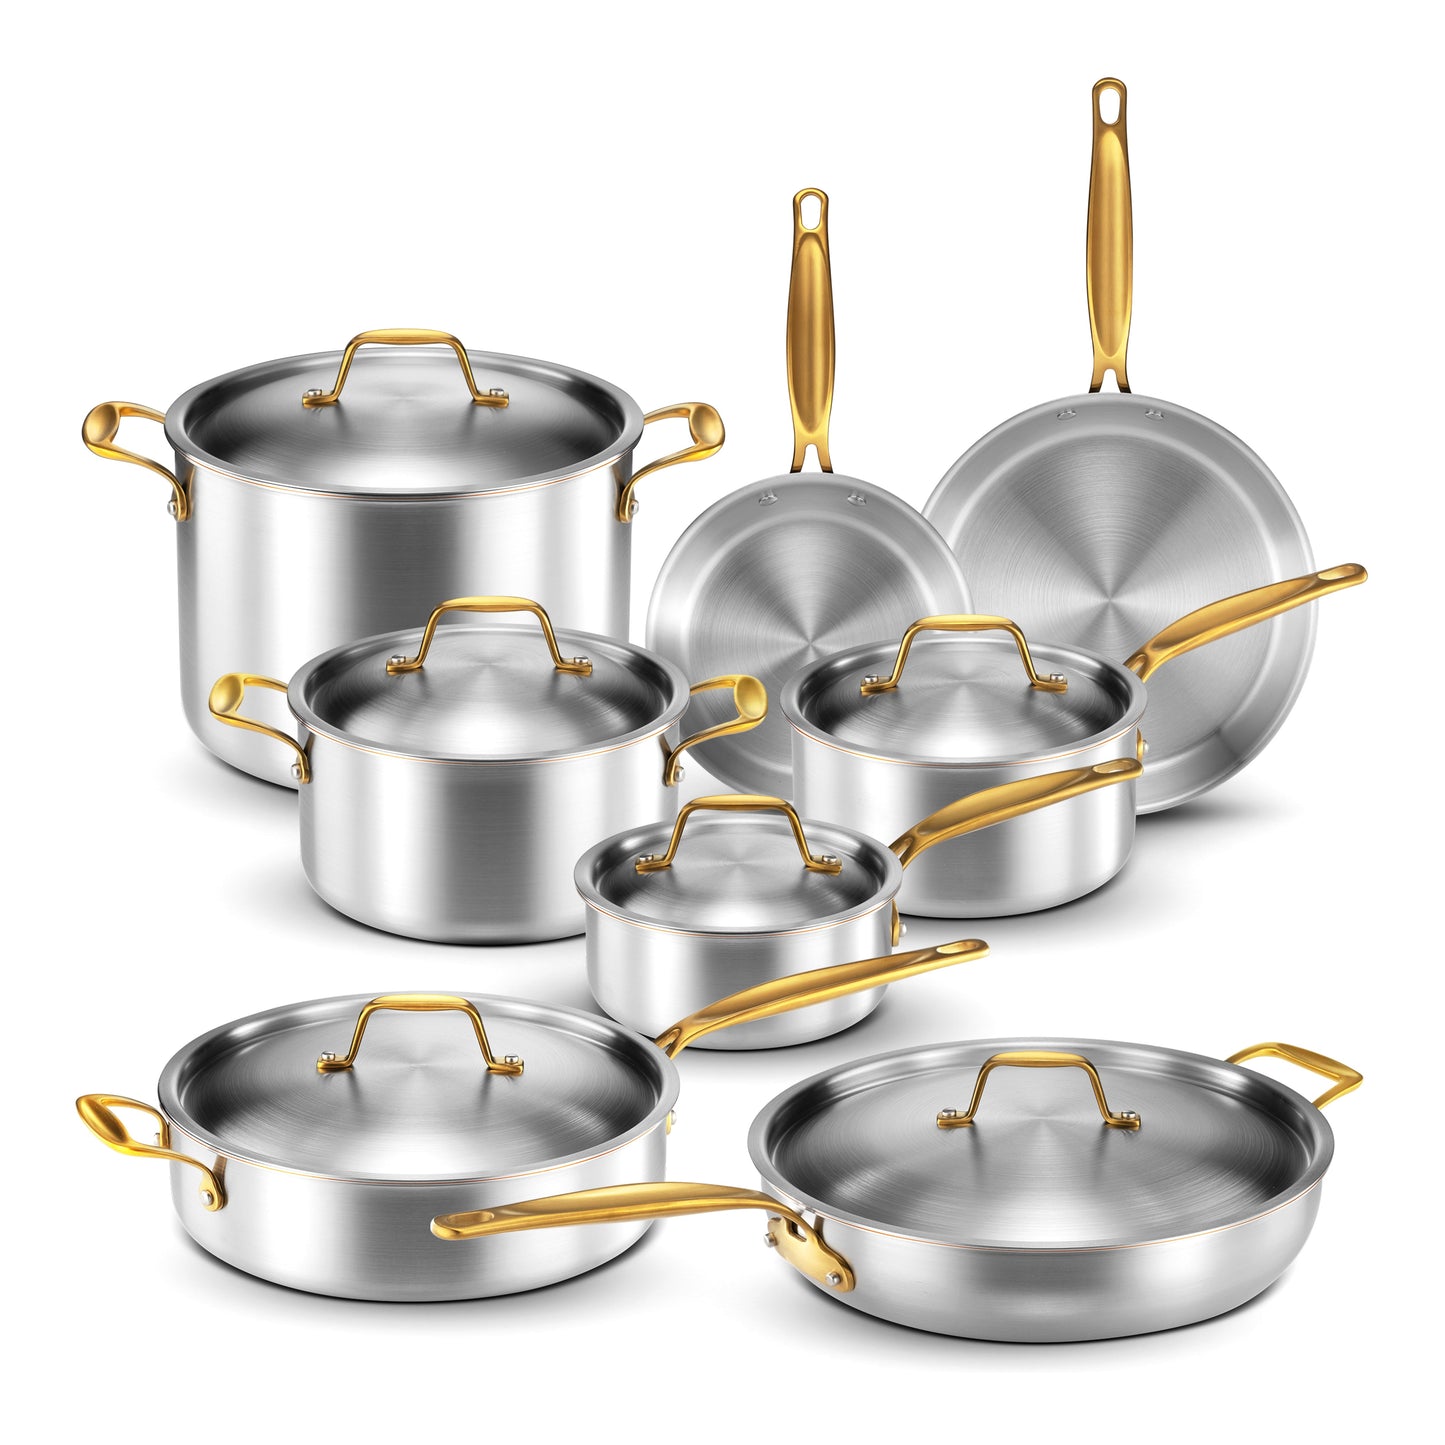 All-clad Stainless Steel 14-piece Cookware Set, Cookware Sets